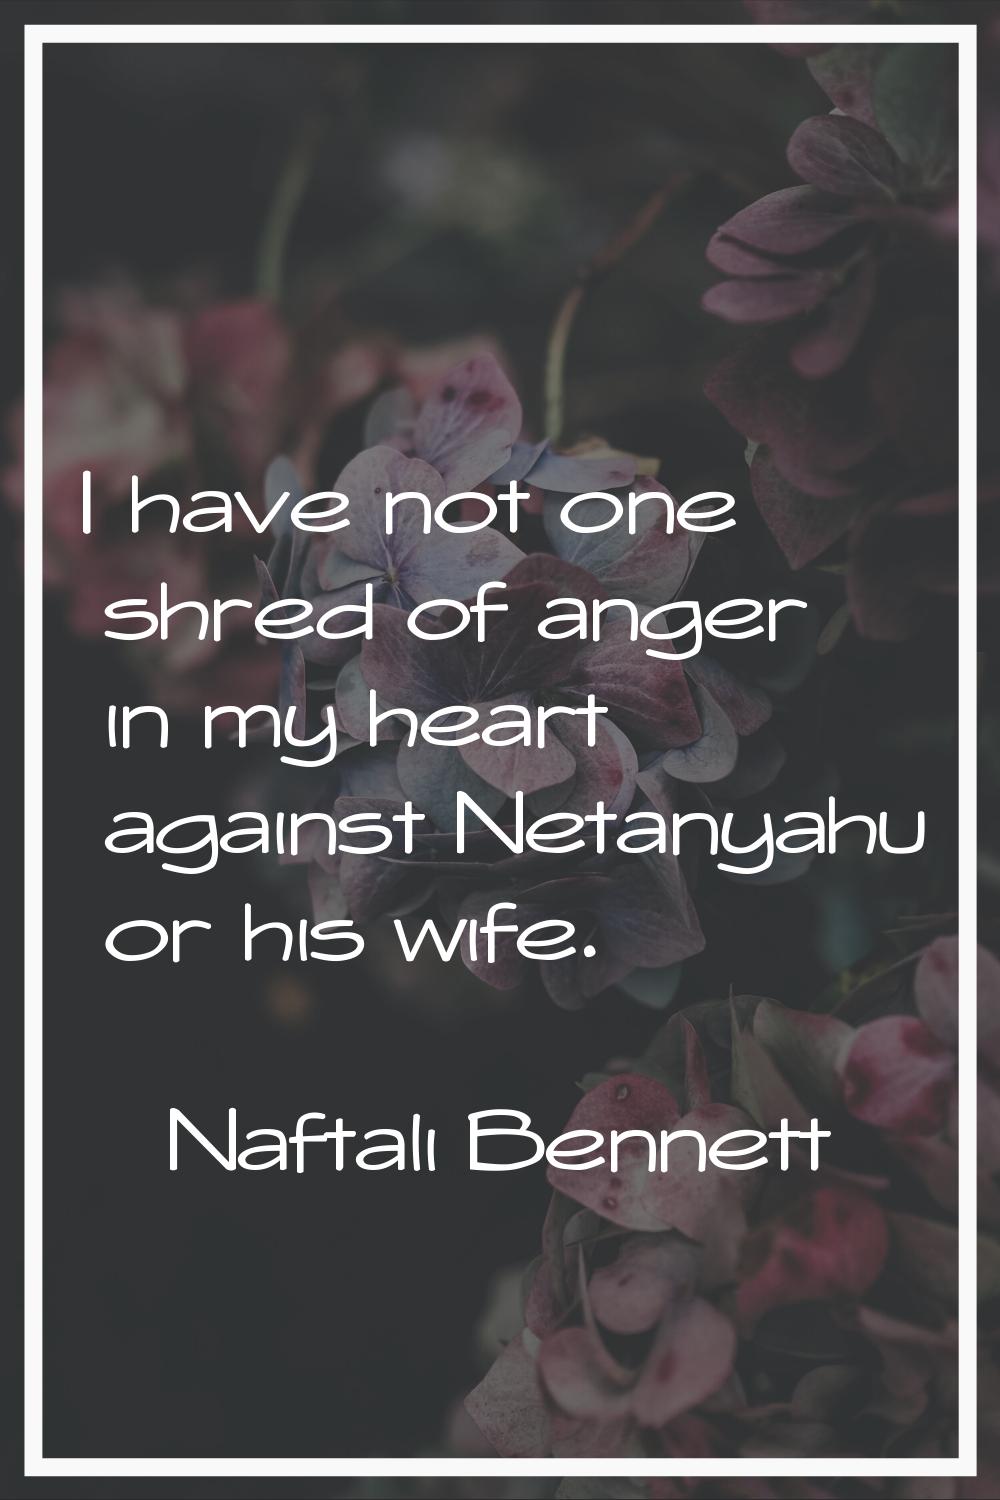 I have not one shred of anger in my heart against Netanyahu or his wife.